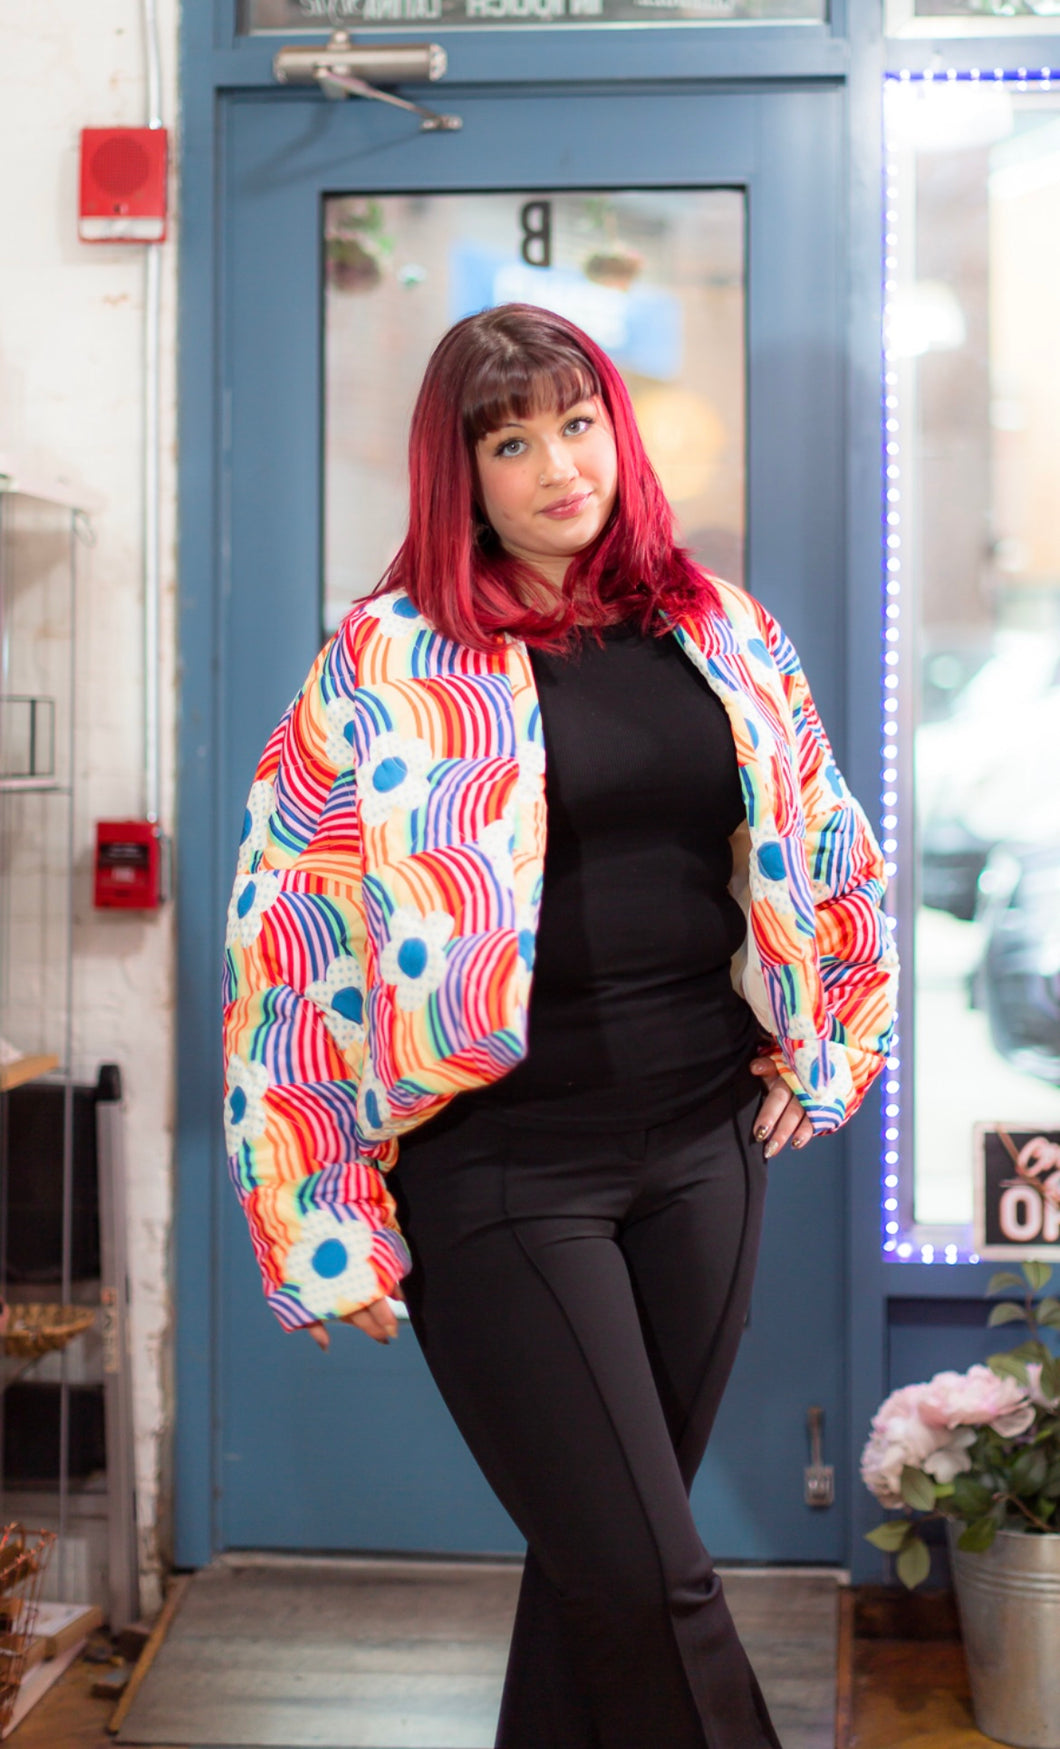 Add a pop of color to your look with our Multicolor Floral Quilted Jacket! Its vibrant design and runway inspired style will make you stand out from the crowd. Elevate your look and turn heads with this statement piece.